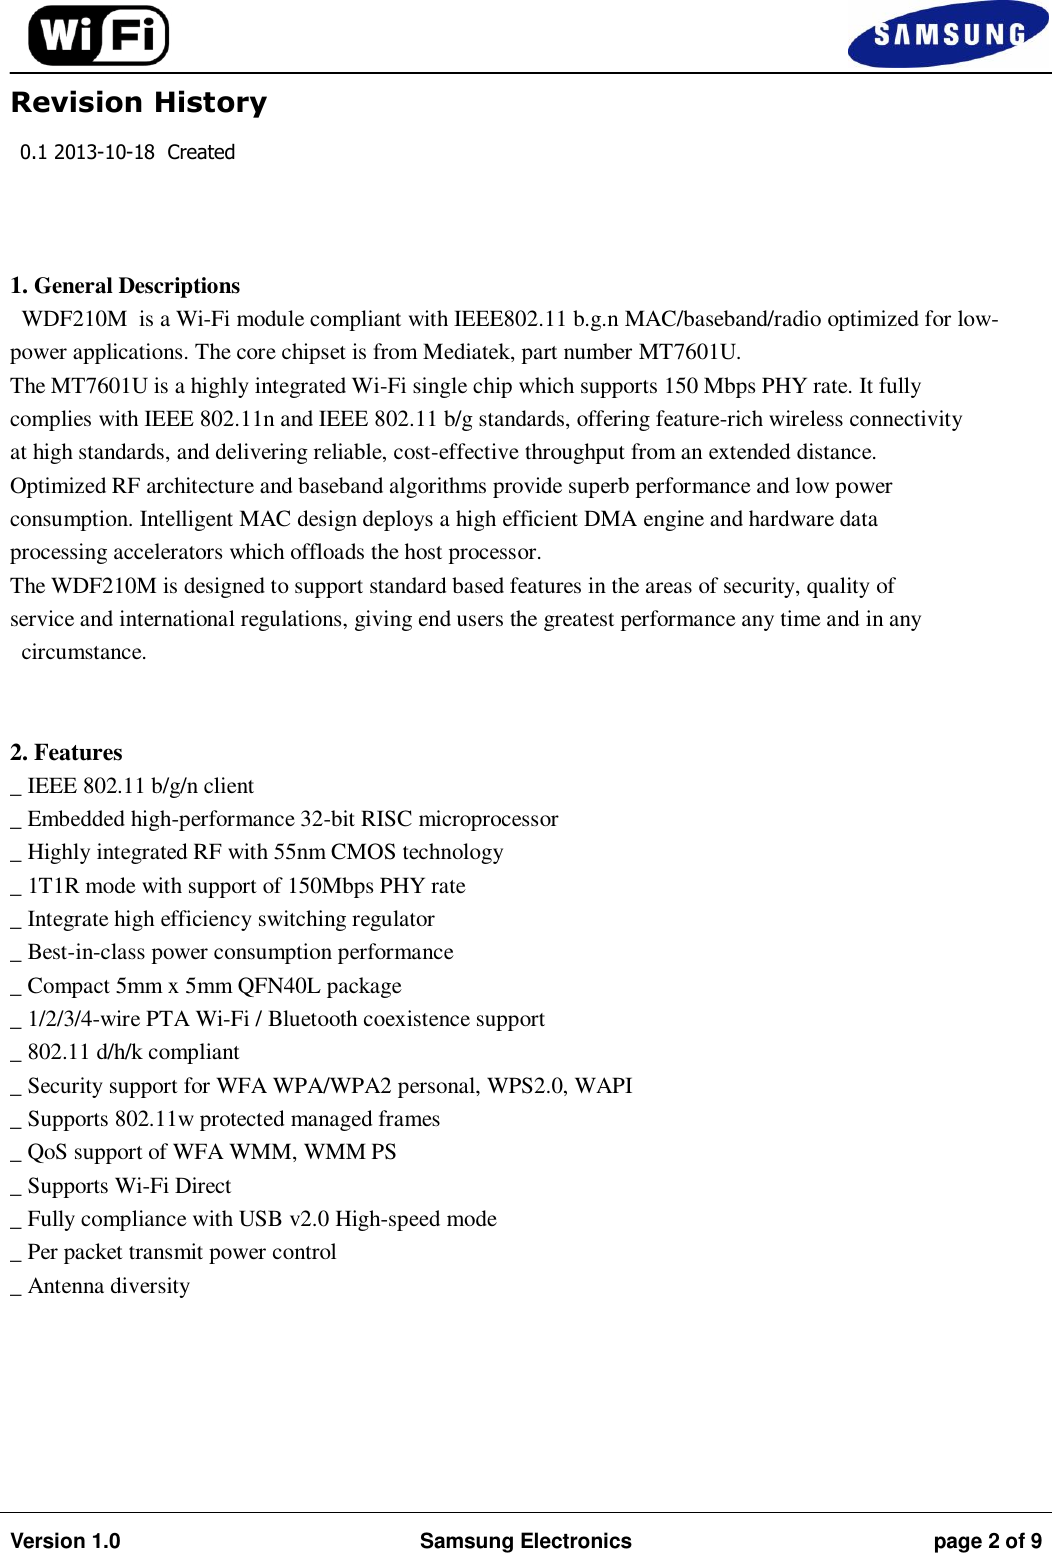                                                                                                                                         Version 1.0 Samsung Electronics page 2 of 9    Revision History 0.1 2013-10-18  Created    1. General Descriptions WDF210M  is a Wi-Fi module compliant with IEEE802.11 b.g.n MAC/baseband/radio optimized for low-power applications. The core chipset is from Mediatek, part number MT7601U. The MT7601U is a highly integrated Wi-Fi single chip which supports 150 Mbps PHY rate. It fully complies with IEEE 802.11n and IEEE 802.11 b/g standards, offering feature-rich wireless connectivity at high standards, and delivering reliable, cost-effective throughput from an extended distance. Optimized RF architecture and baseband algorithms provide superb performance and low power consumption. Intelligent MAC design deploys a high efficient DMA engine and hardware data processing accelerators which offloads the host processor. The WDF210M is designed to support standard based features in the areas of security, quality of service and international regulations, giving end users the greatest performance any time and in any circumstance.   2. Features _ IEEE 802.11 b/g/n client _ Embedded high-performance 32-bit RISC microprocessor _ Highly integrated RF with 55nm CMOS technology _ 1T1R mode with support of 150Mbps PHY rate _ Integrate high efficiency switching regulator _ Best-in-class power consumption performance _ Compact 5mm x 5mm QFN40L package _ 1/2/3/4-wire PTA Wi-Fi / Bluetooth coexistence support _ 802.11 d/h/k compliant _ Security support for WFA WPA/WPA2 personal, WPS2.0, WAPI _ Supports 802.11w protected managed frames _ QoS support of WFA WMM, WMM PS _ Supports Wi-Fi Direct _ Fully compliance with USB v2.0 High-speed mode _ Per packet transmit power control _ Antenna diversity      